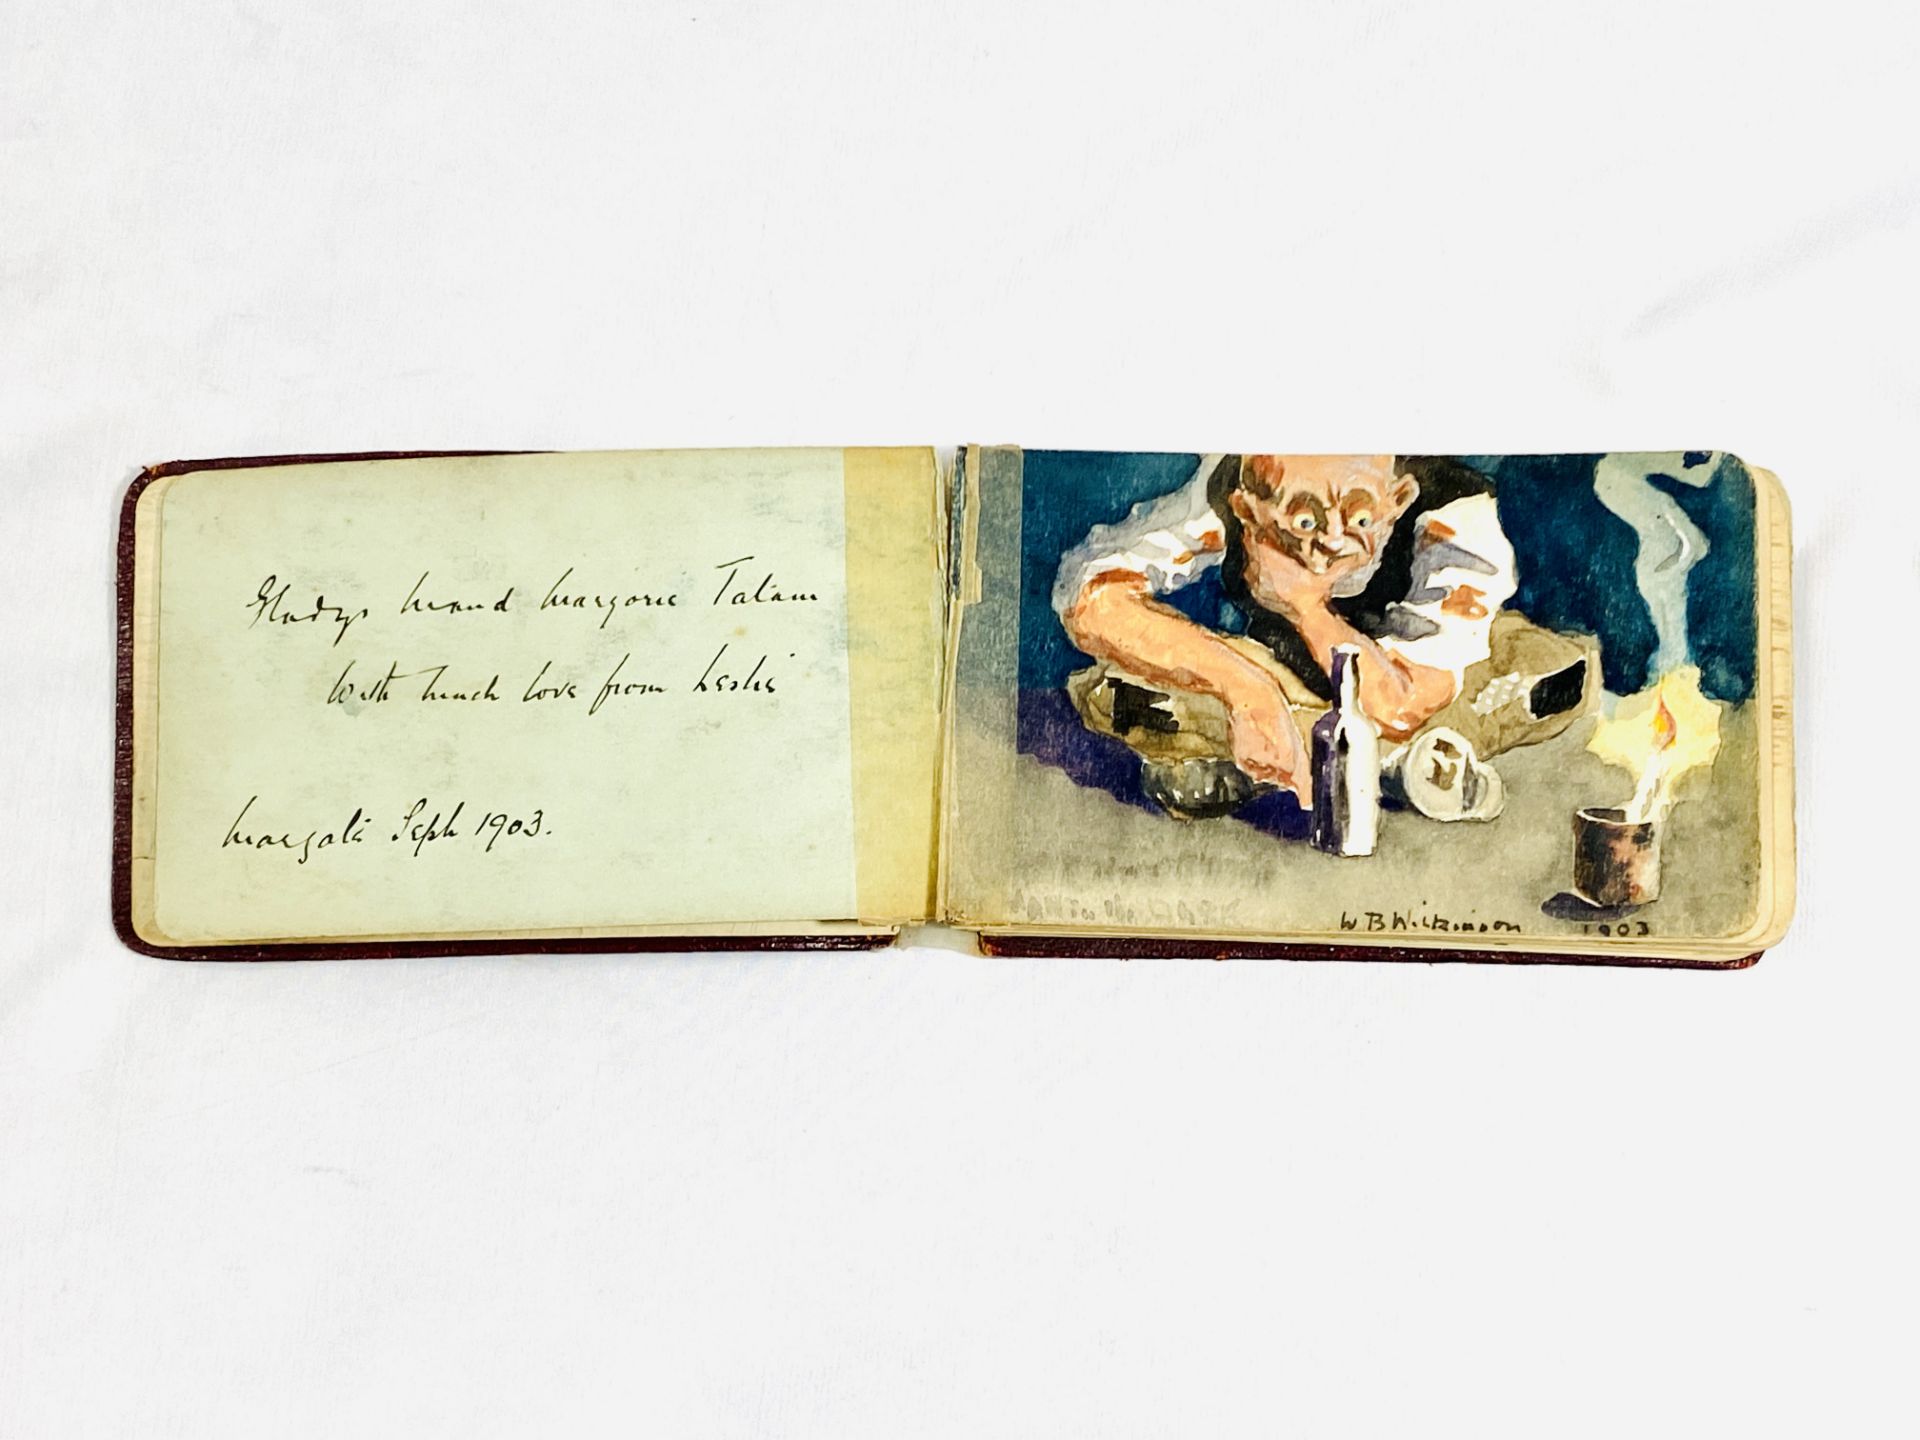 Early 20th century autograph book - Image 2 of 5